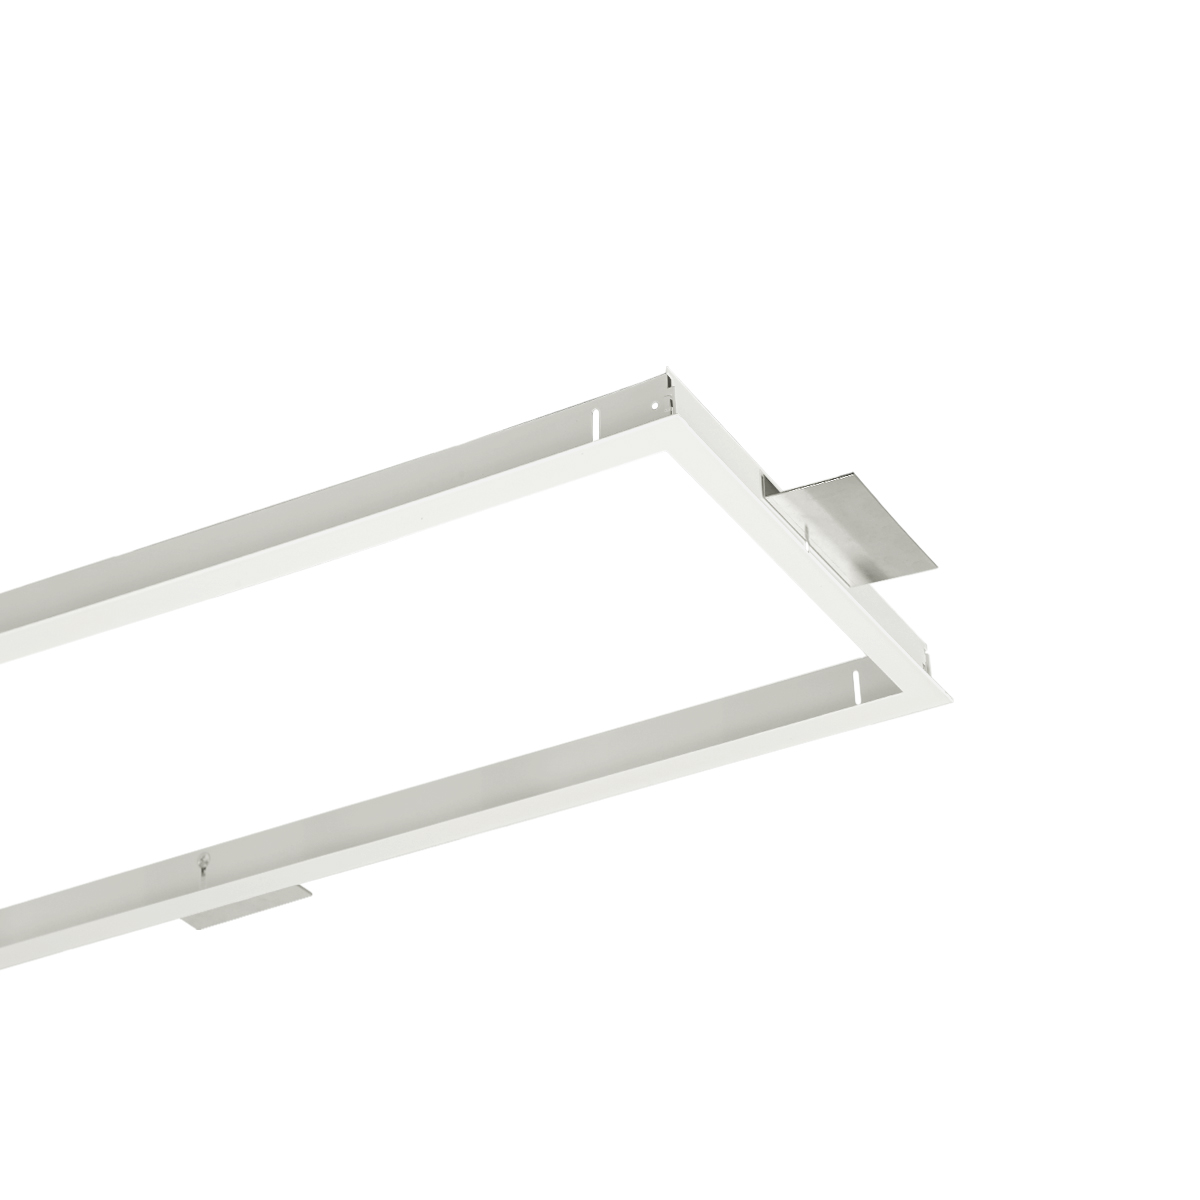 CEILING RECESSED FRAME 600X300